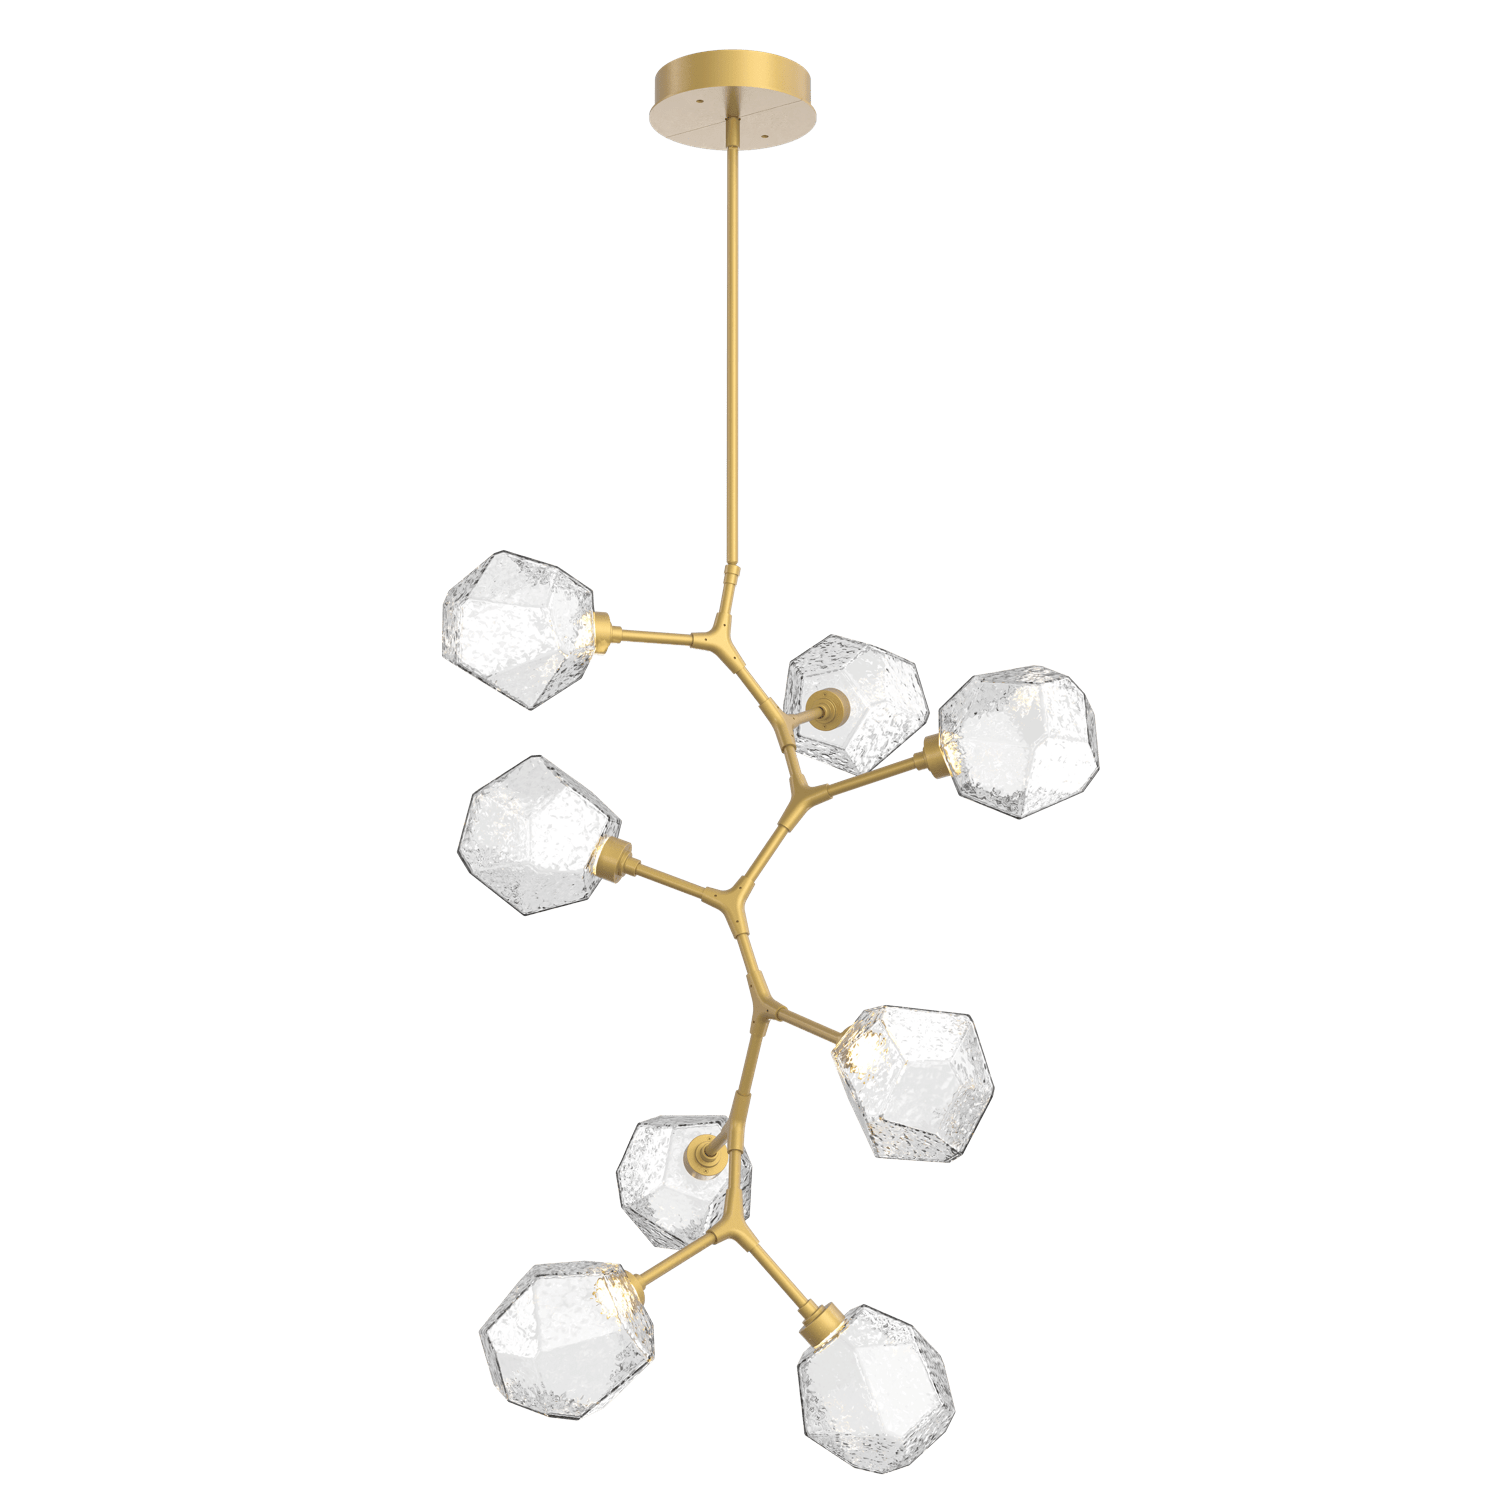 CHB0039-VB-GB-C-Hammerton-Studio-Gem-8-light-modern-vine-chandelier-with-gilded-brass-finish-and-clear-blown-glass-shades-and-LED-lamping